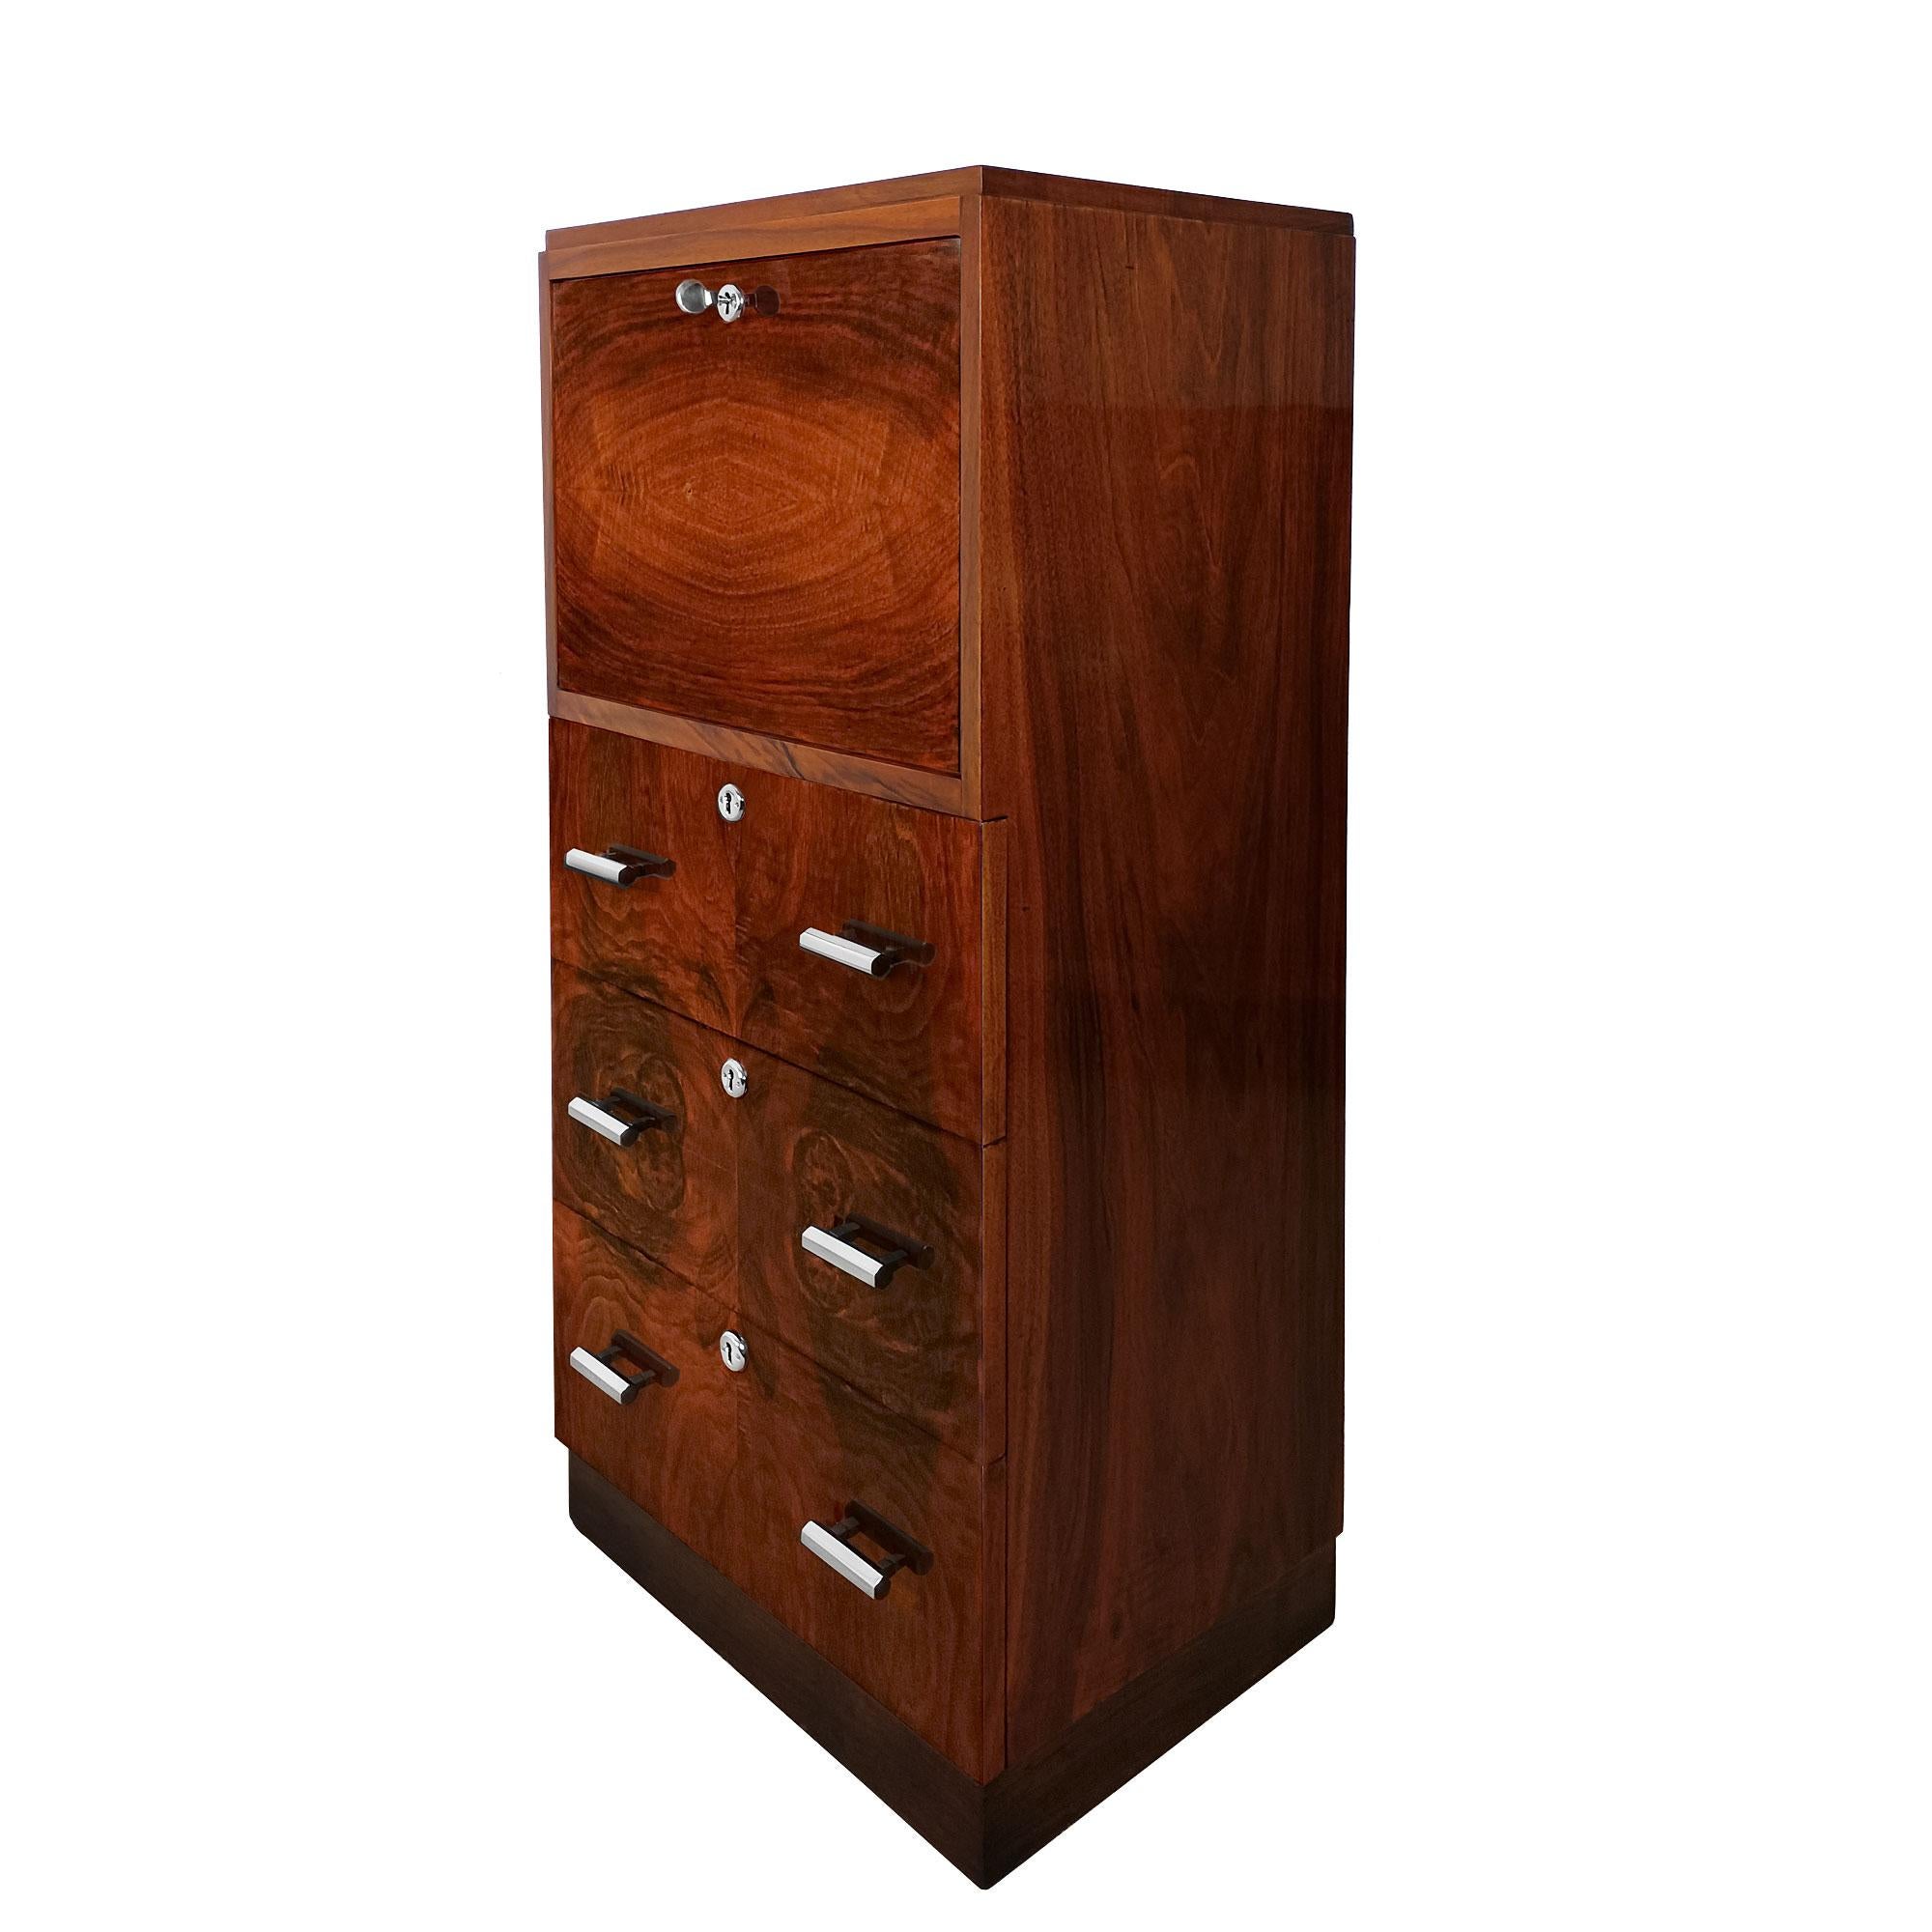 Small Art Deco writing desk with walnut and burr walnut veneer, three drawers and a flap door opening onto a small desk and storage area in marquetry and light walnut. Very good quality of workmanship. French polish,
France circa